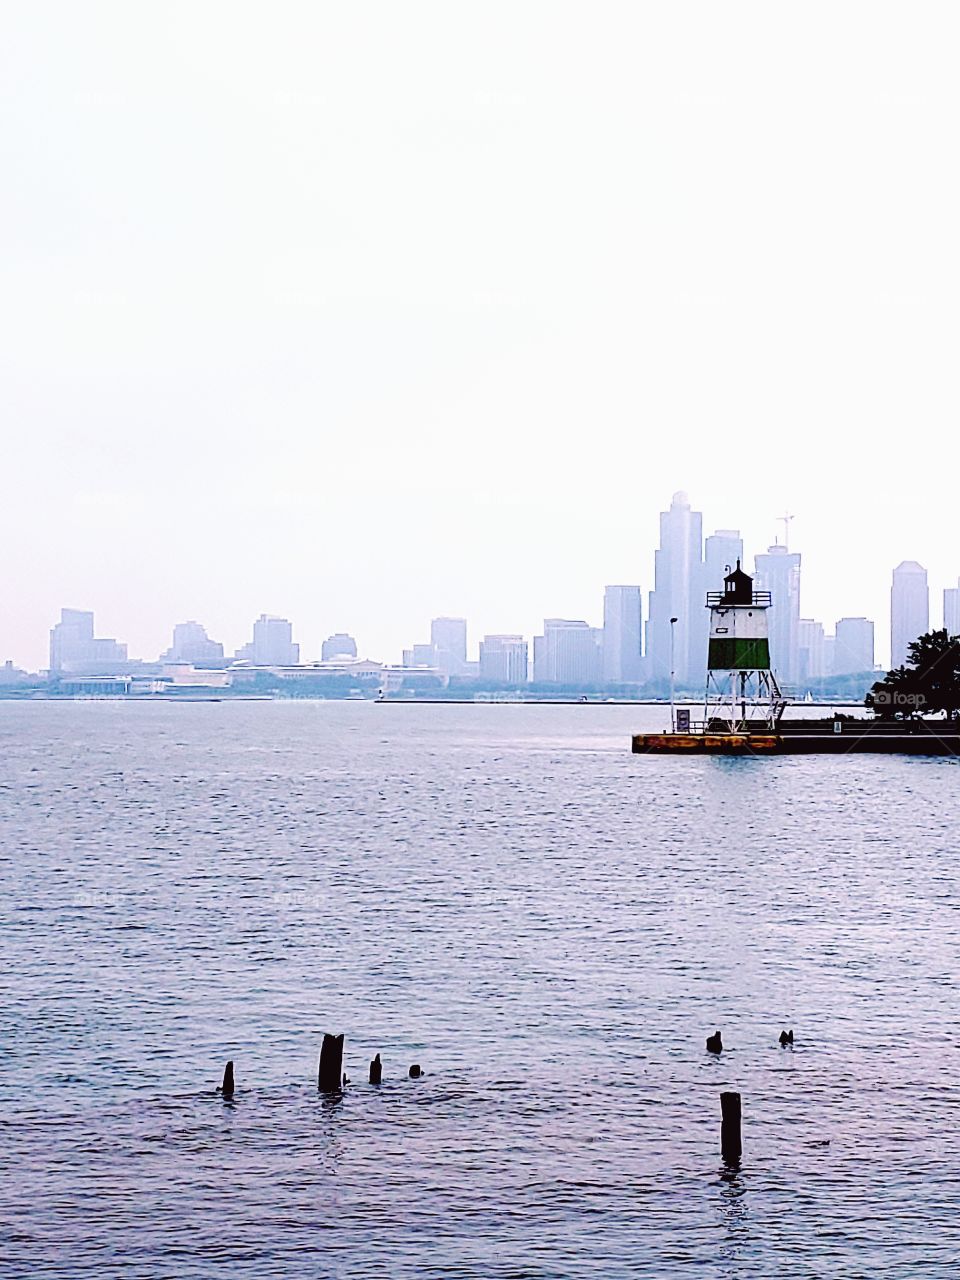 View of foggy downtown Chicago from Lake Michigan with a small lighthouse